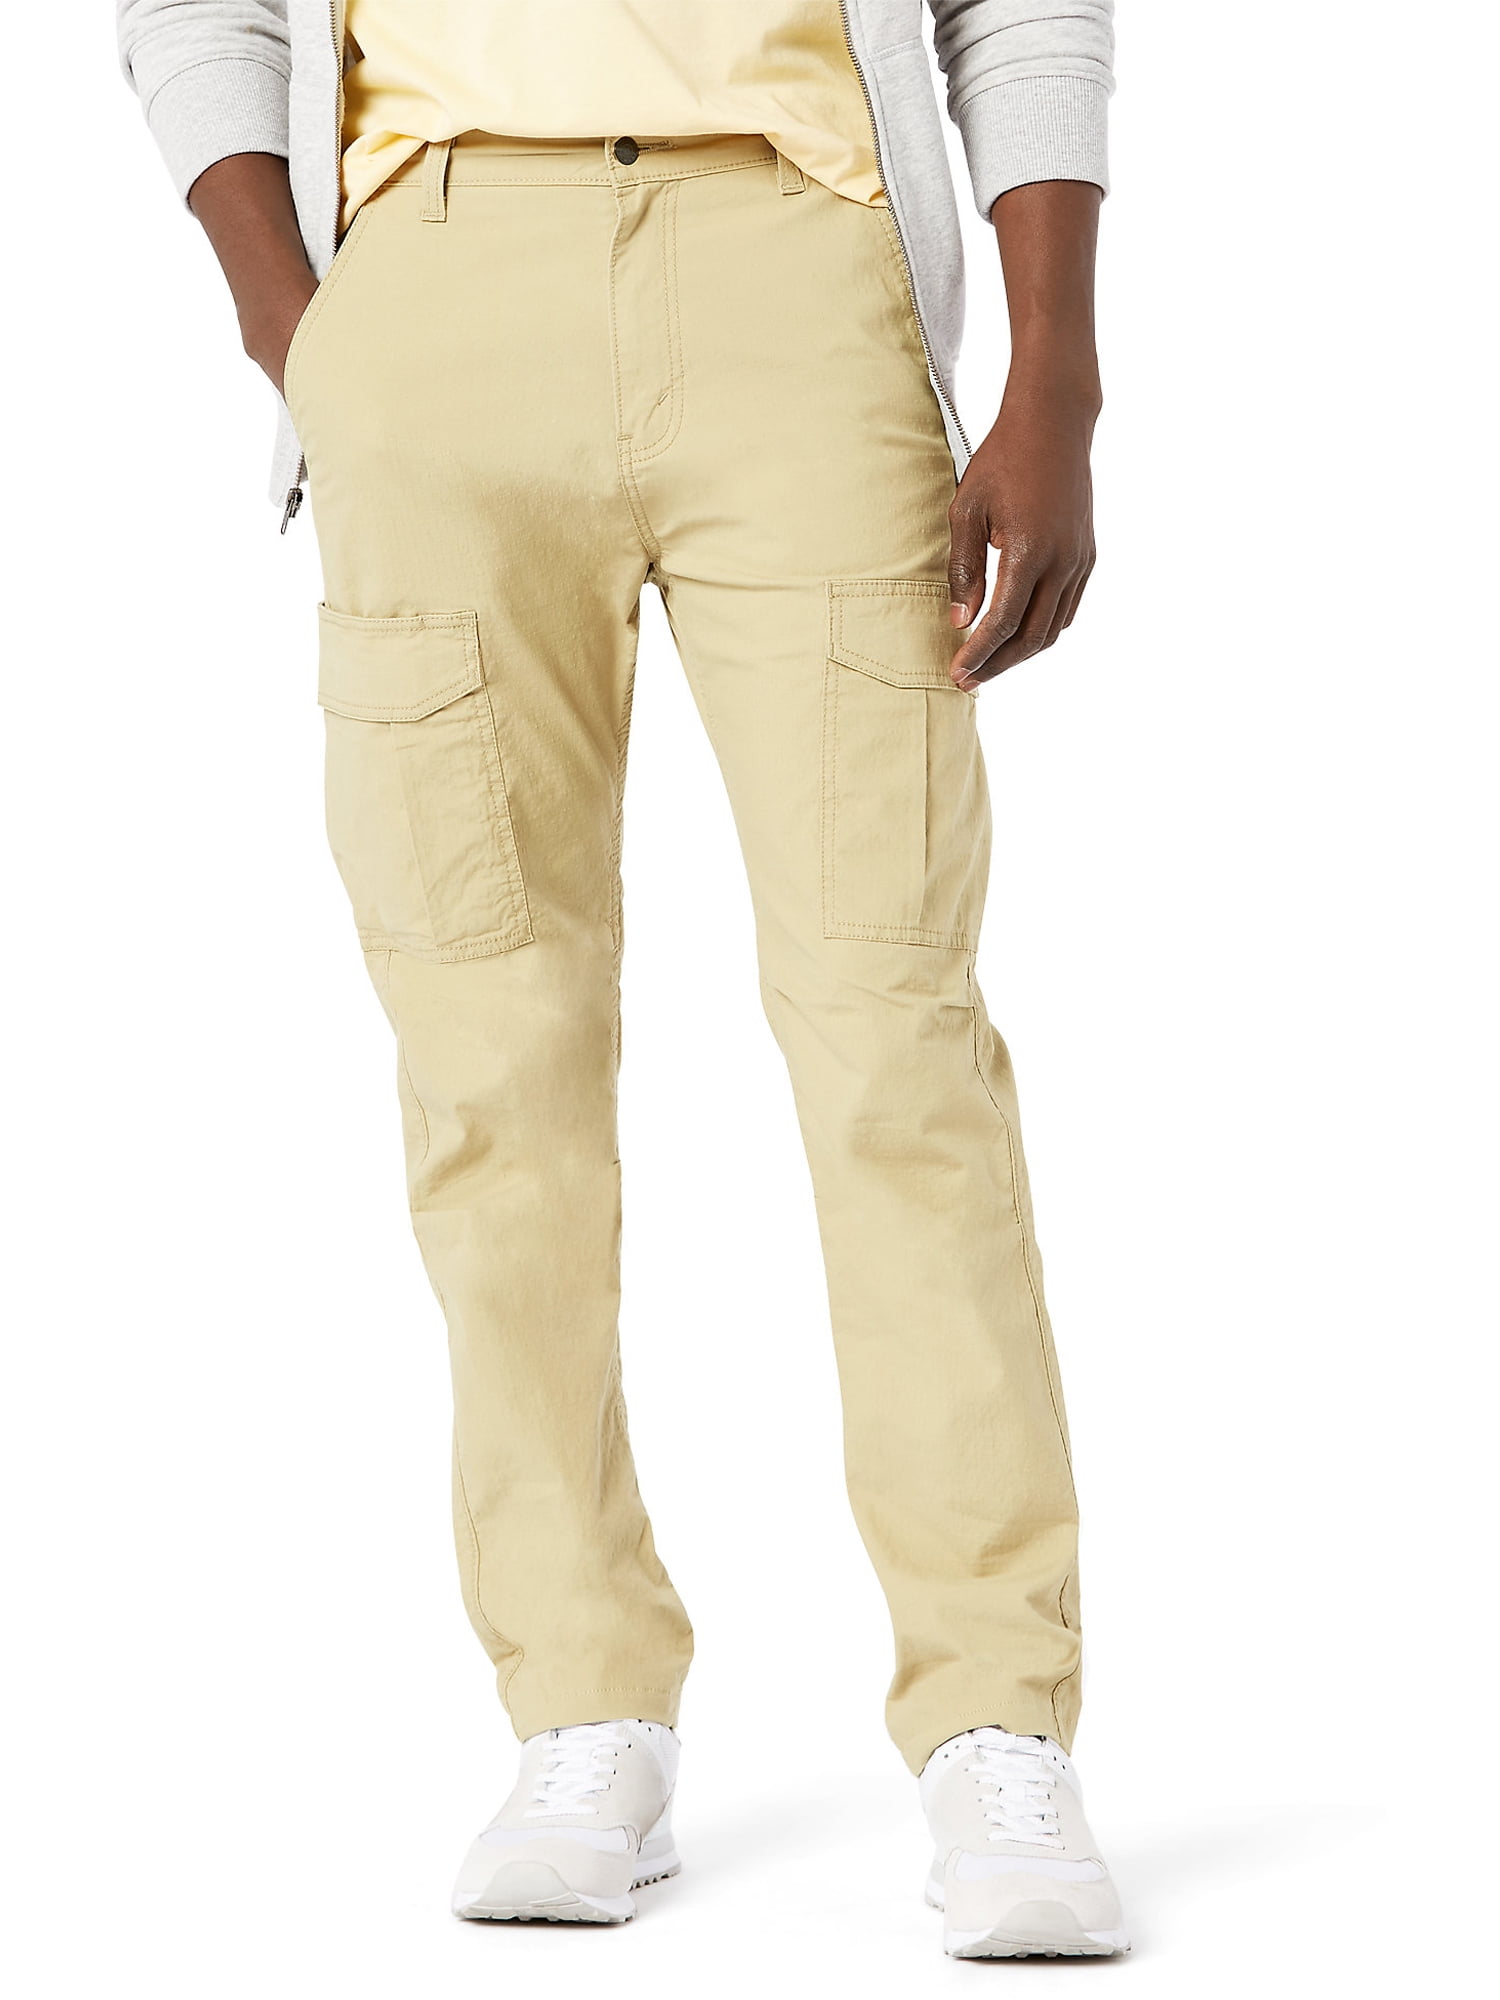 Signature by Levi Strauss & Co. Gold Label Men's Outdoors Utility Hiking  Pant (Available in Big & Tall), (New) Magnet, 28Wx30L at Amazon Men's  Clothing store